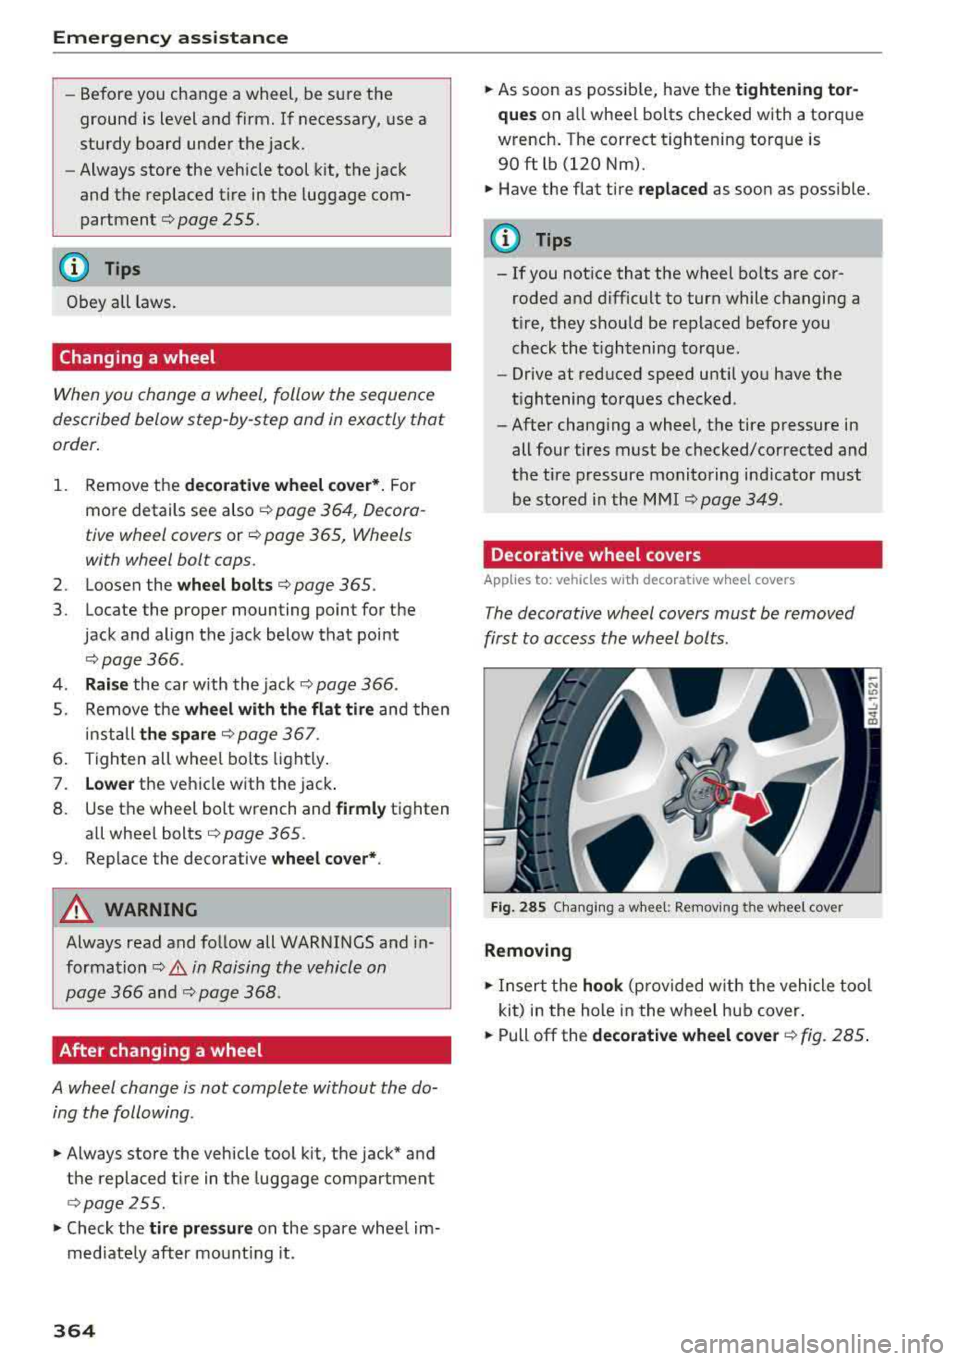 AUDI A3 SEDAN 2018  Owners Manual Emergency  assistance 
-Before  you  change  a wheel,  be  sure  the  
ground  is  level  and  firm.  If  necessary,  use  a 
sturdy  board  under  the  jack. 
-Always  store  the  veh icle  tool  kit